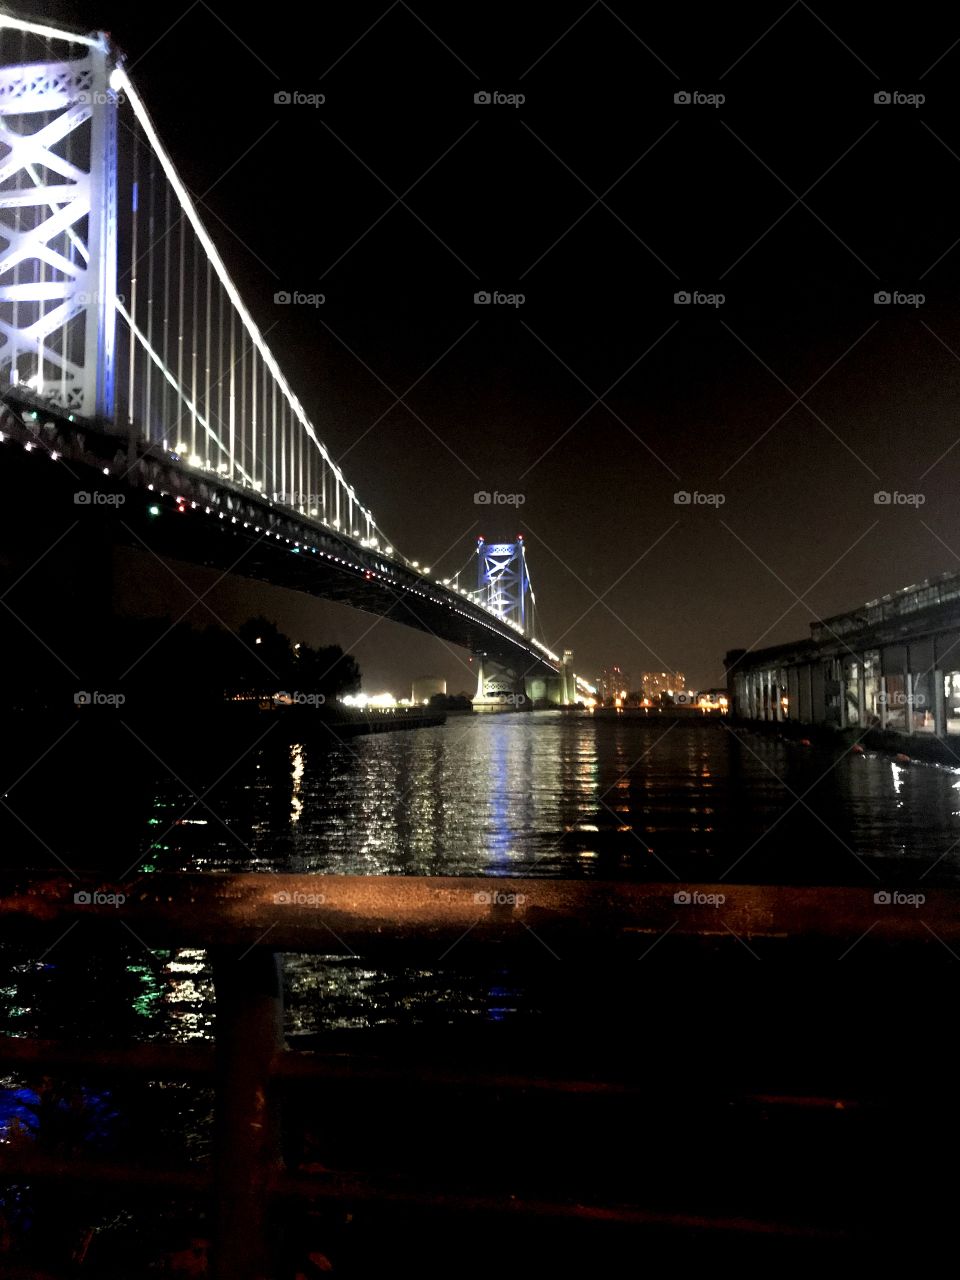 View from festival pier in Philadelphia at night. Bridge over water